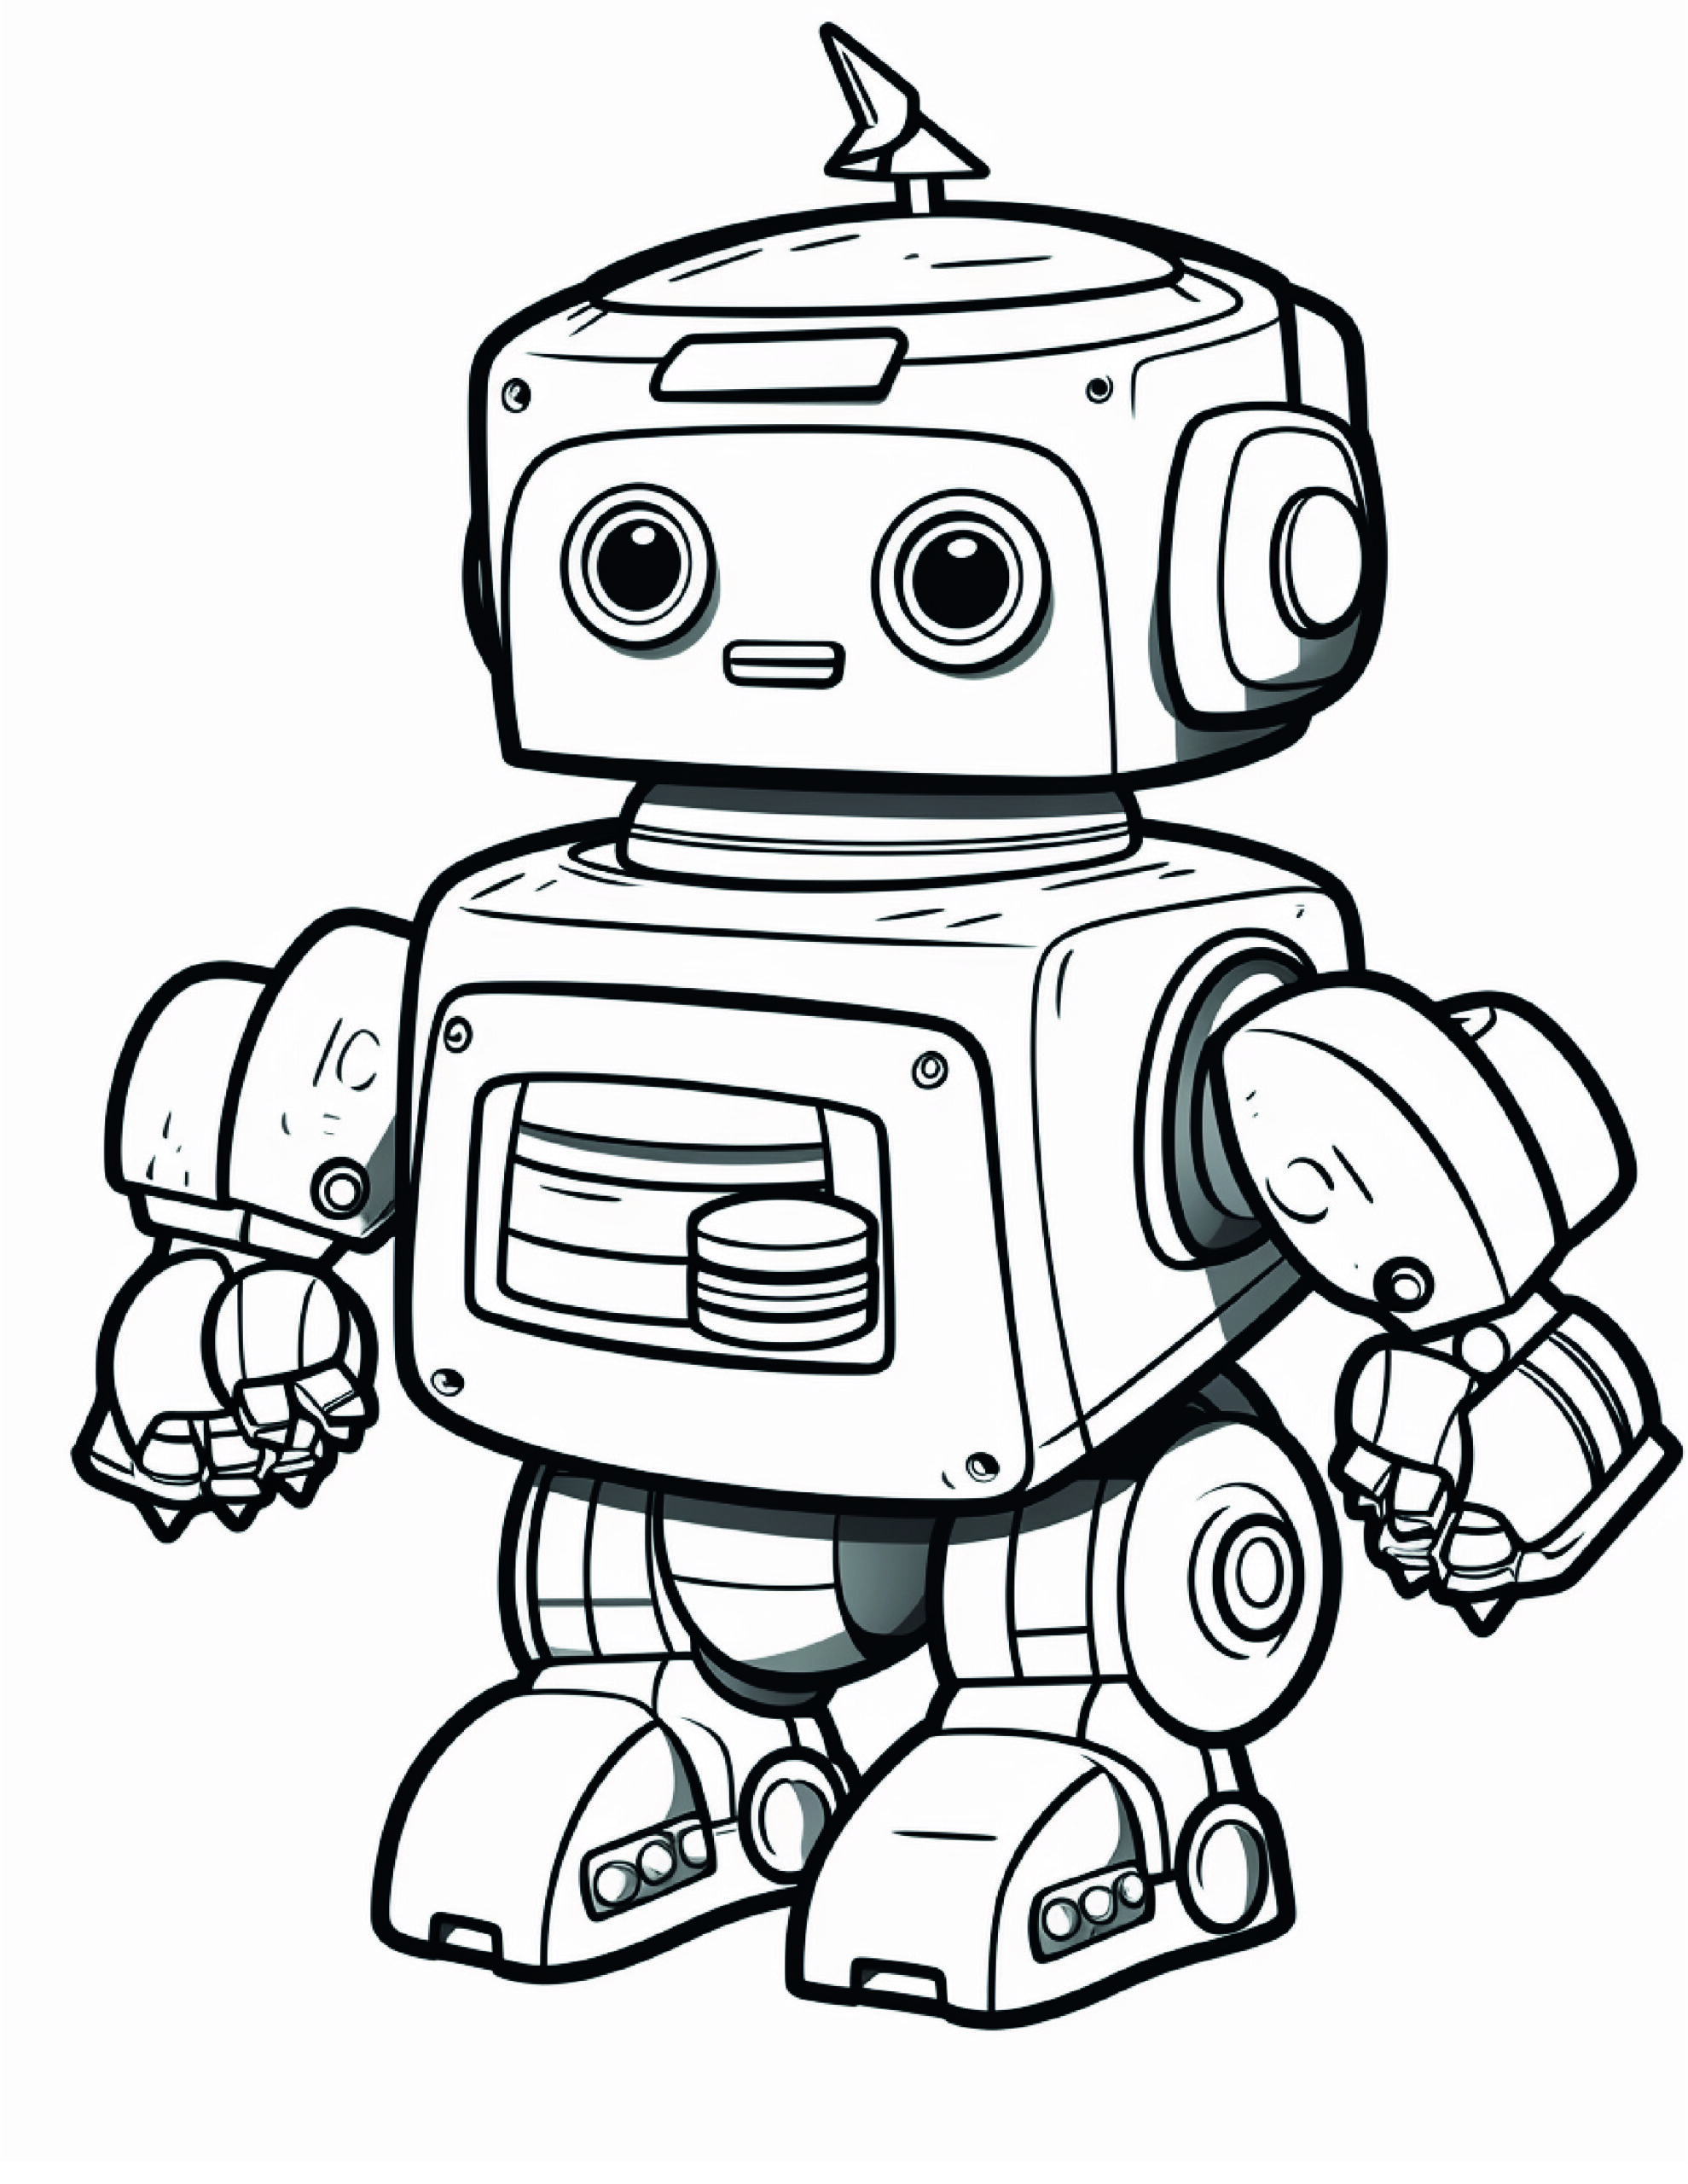 Robot Coloring Page 15 - A line drawing of a large robot. 